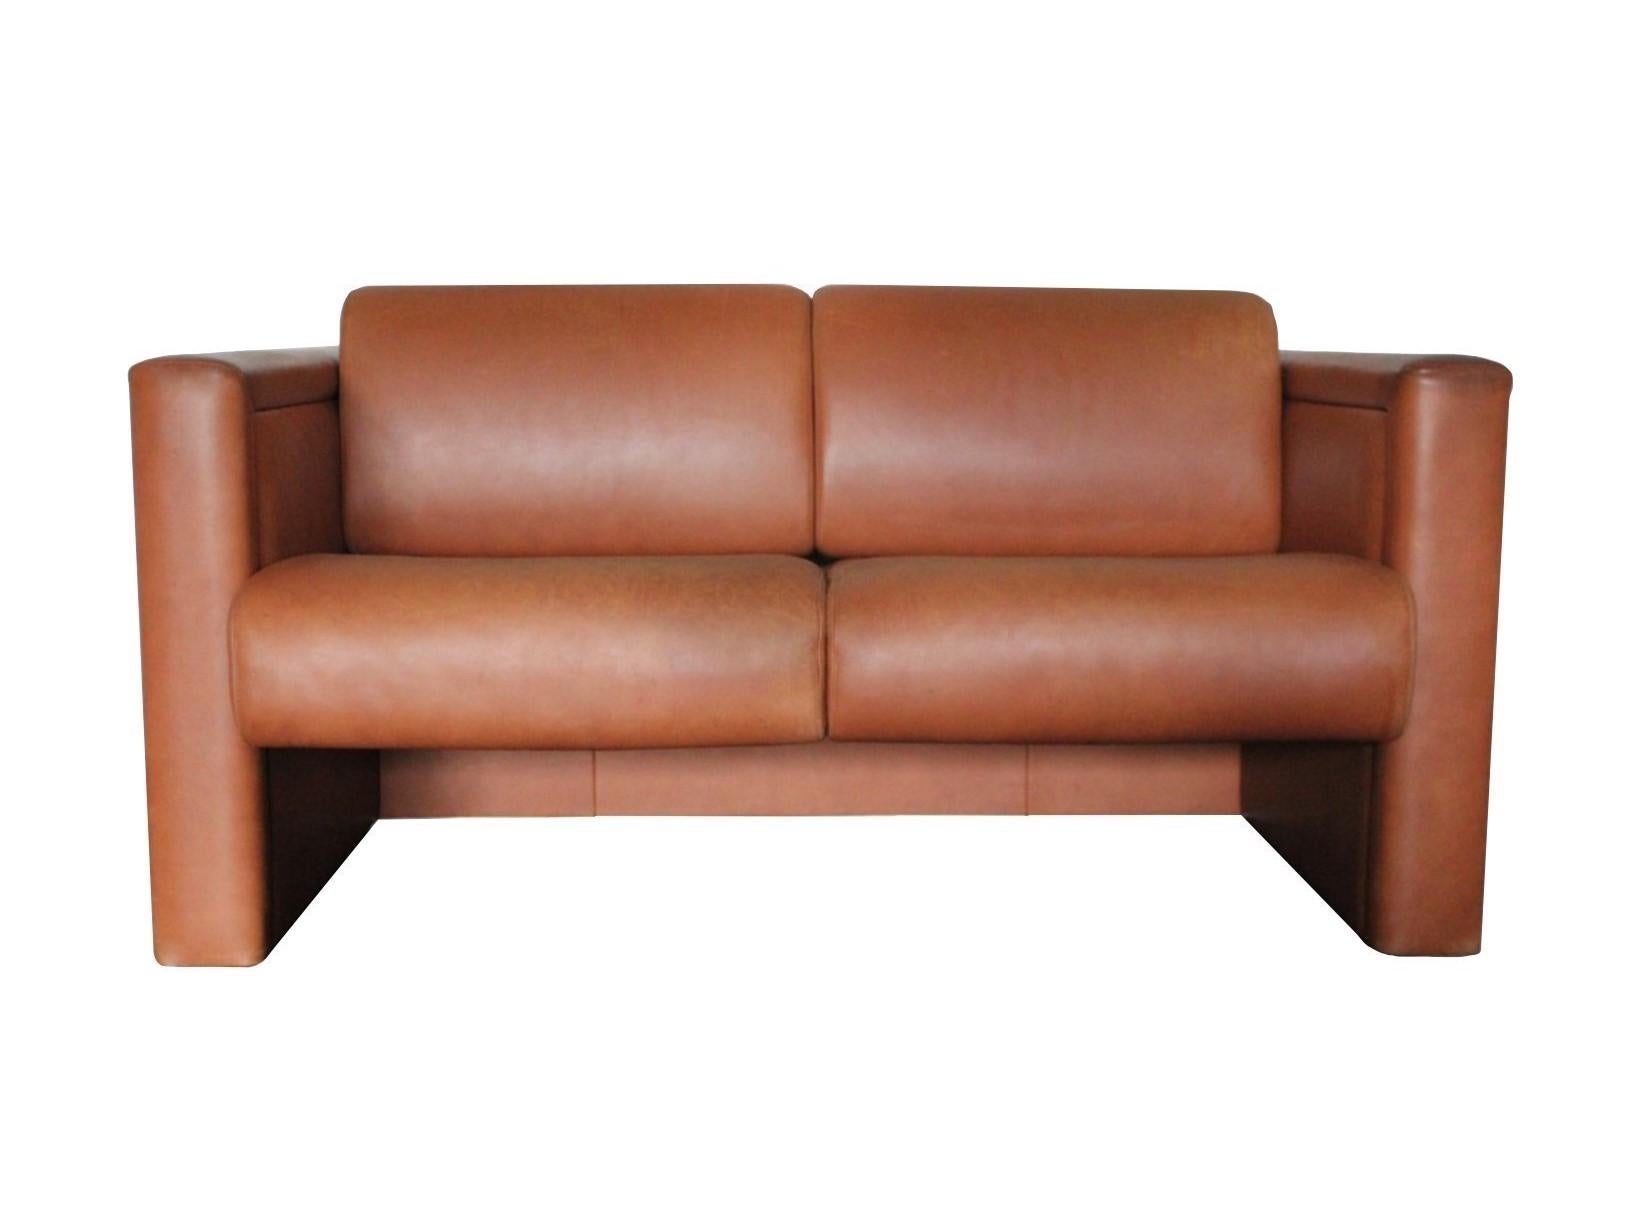 This iconic modern-design of peerless quality is a 2-seat lounge seating sofa designed by Trix and Robert Haussmann and manufactured by the world-renown Furniture House, Knoll International. Generously upholstered back and seat cushioning in a tan